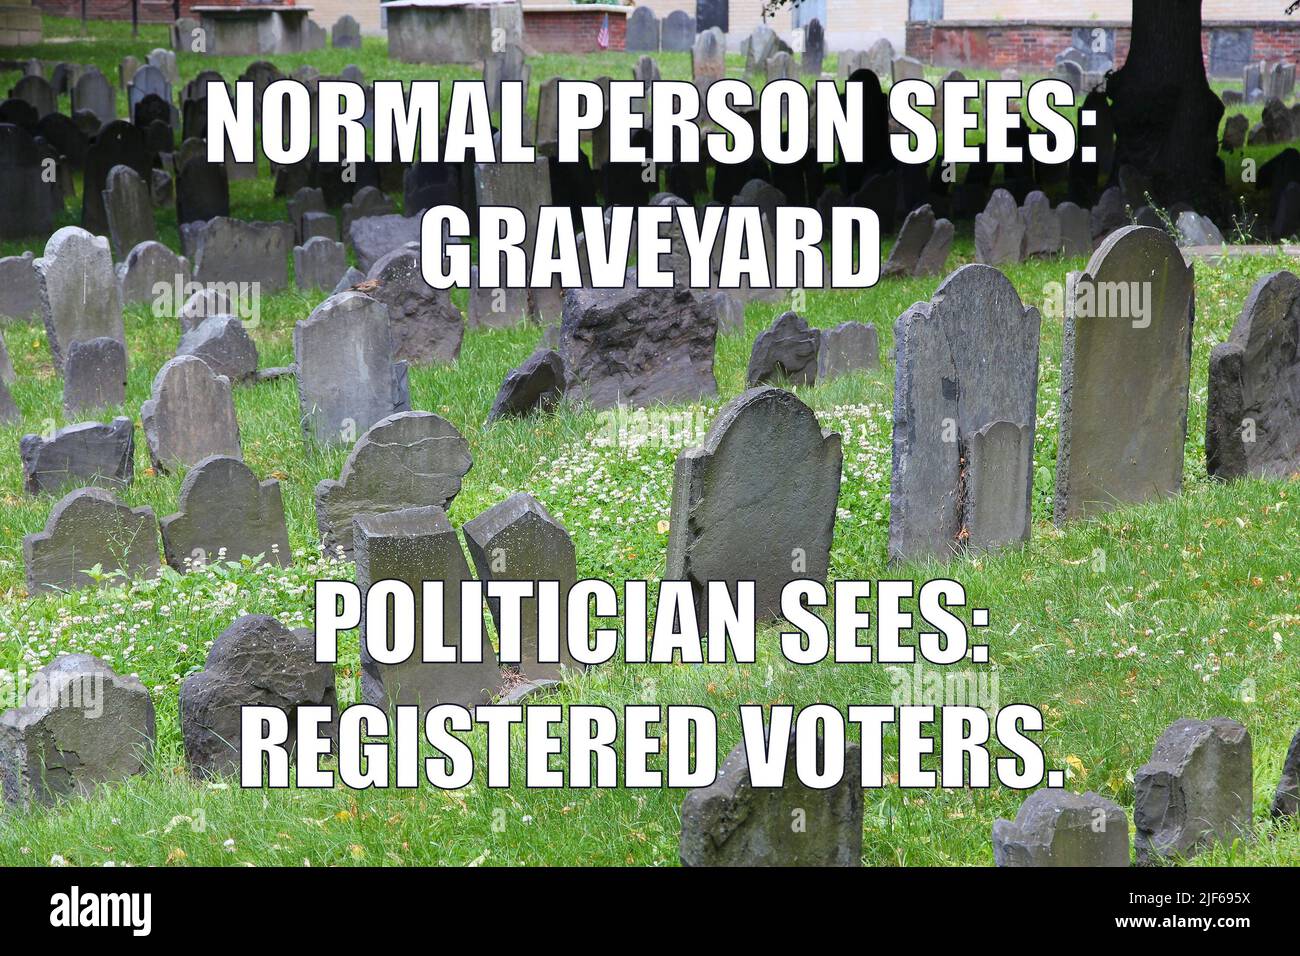 Registered voters in cemetery funny meme for social media sharing. Dark humor with election problems. Stock Photo